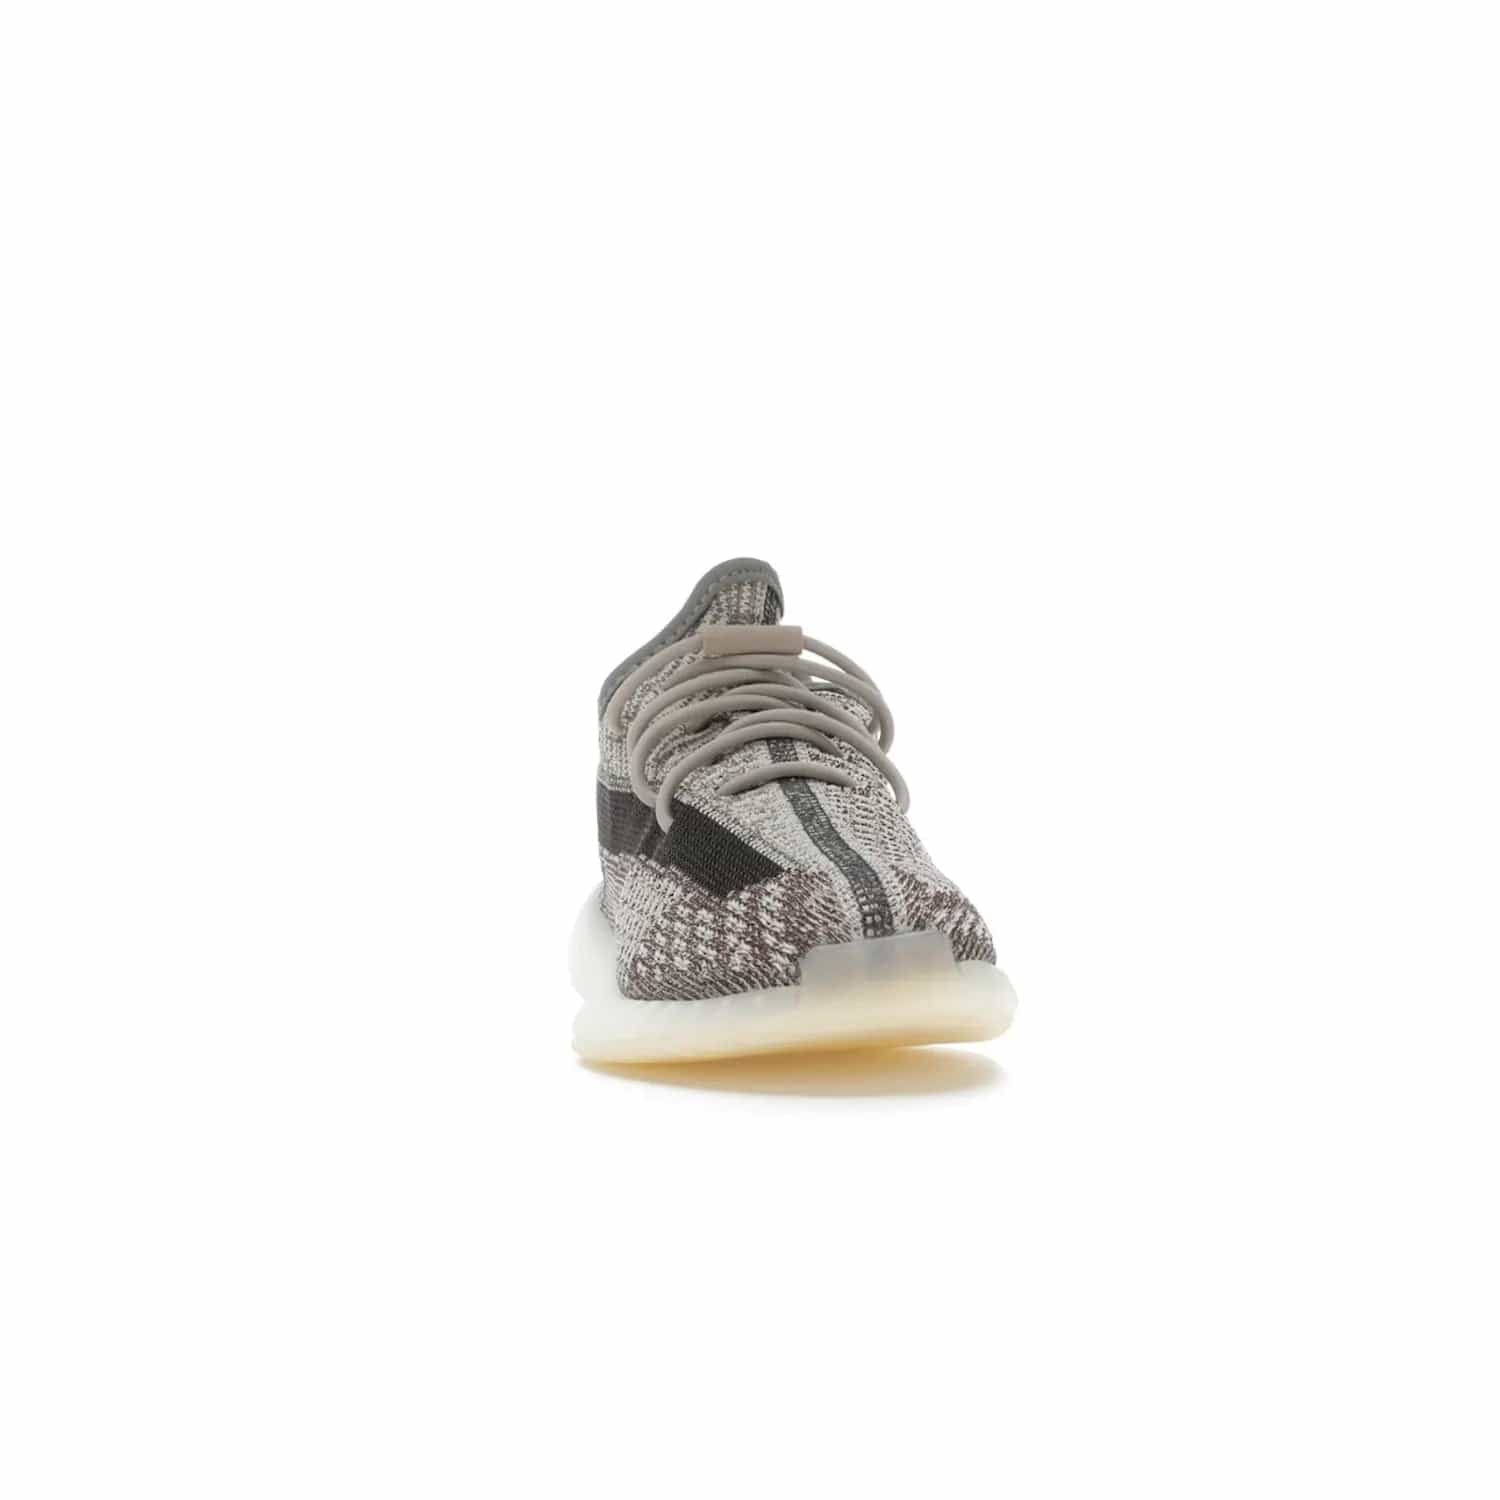 adidas Yeezy Boost 350 V2 Zyon (Kids) - Image 9 - Only at www.BallersClubKickz.com - The adidas Yeezy Boost 350 V2 Zyon (Kids) - perfect pick for fashion-savvy kids. Features soft Primeknit upper, lace closure & colorful patterning. Comfort & style for kids' summer outfits!